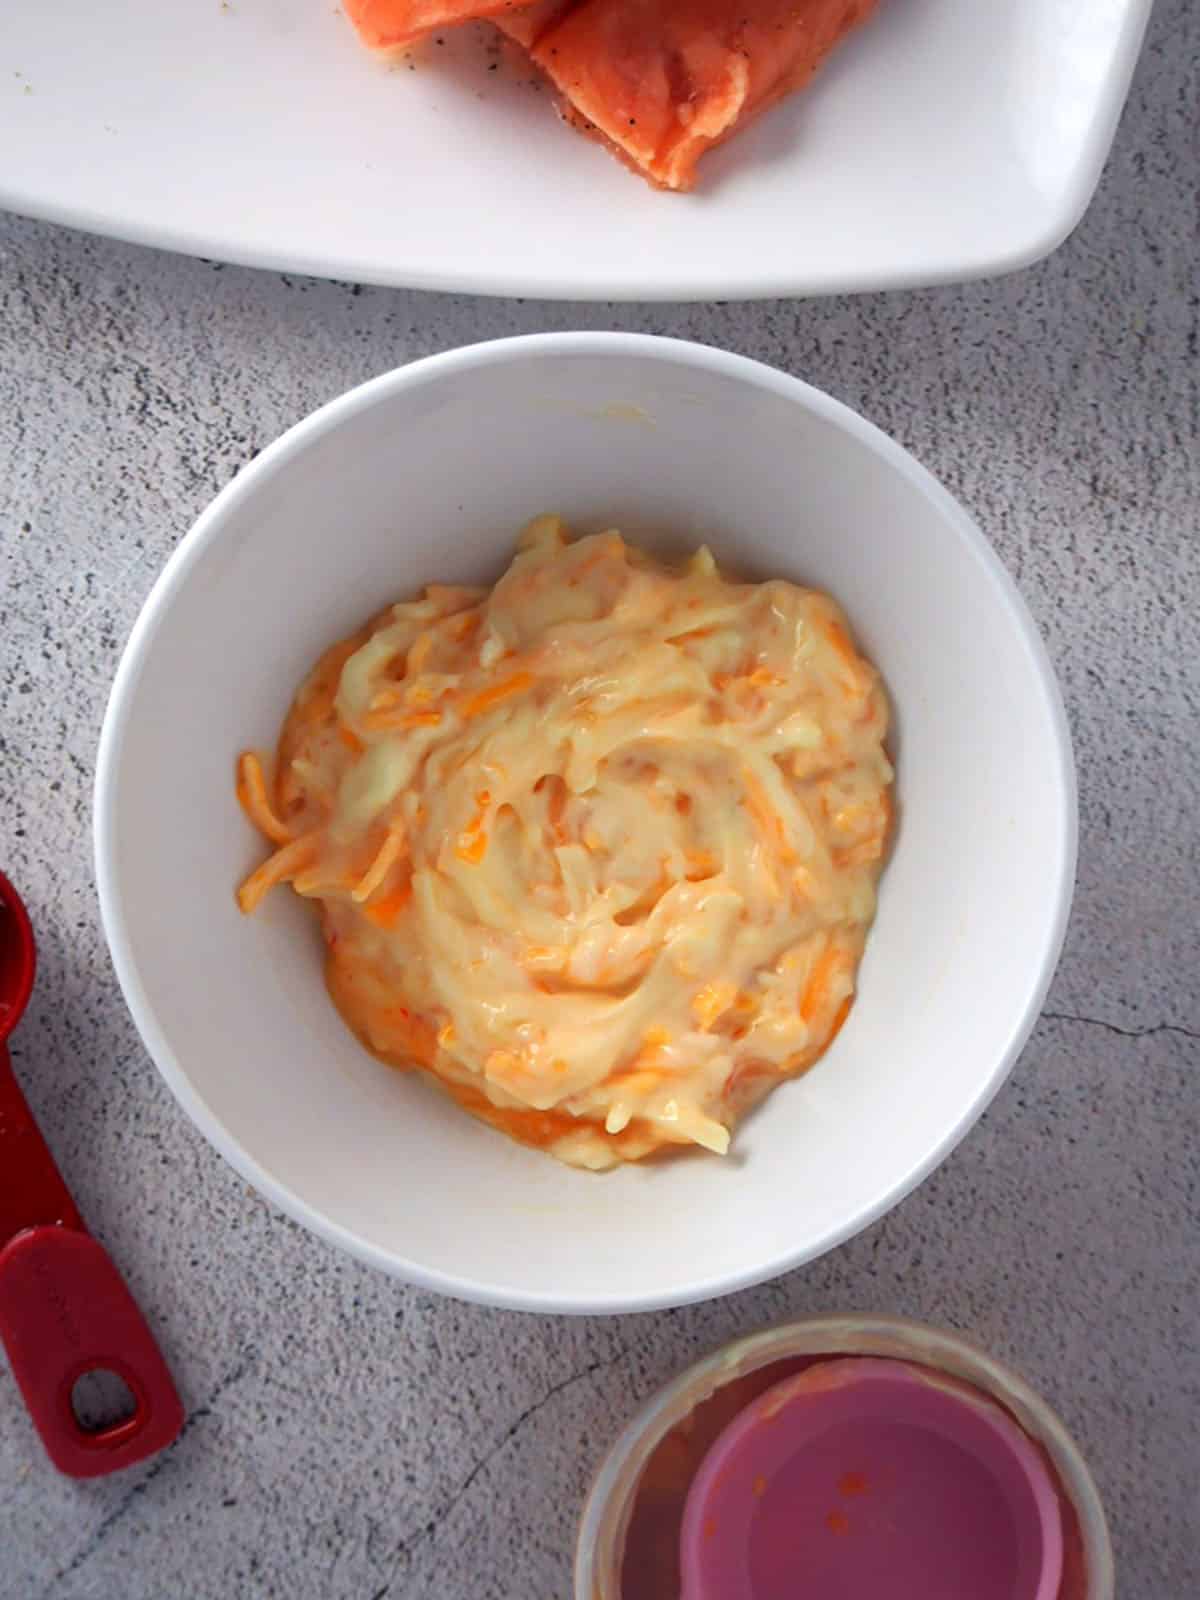 mayonnaise, cheese, and sweet chili mixture in a bowl